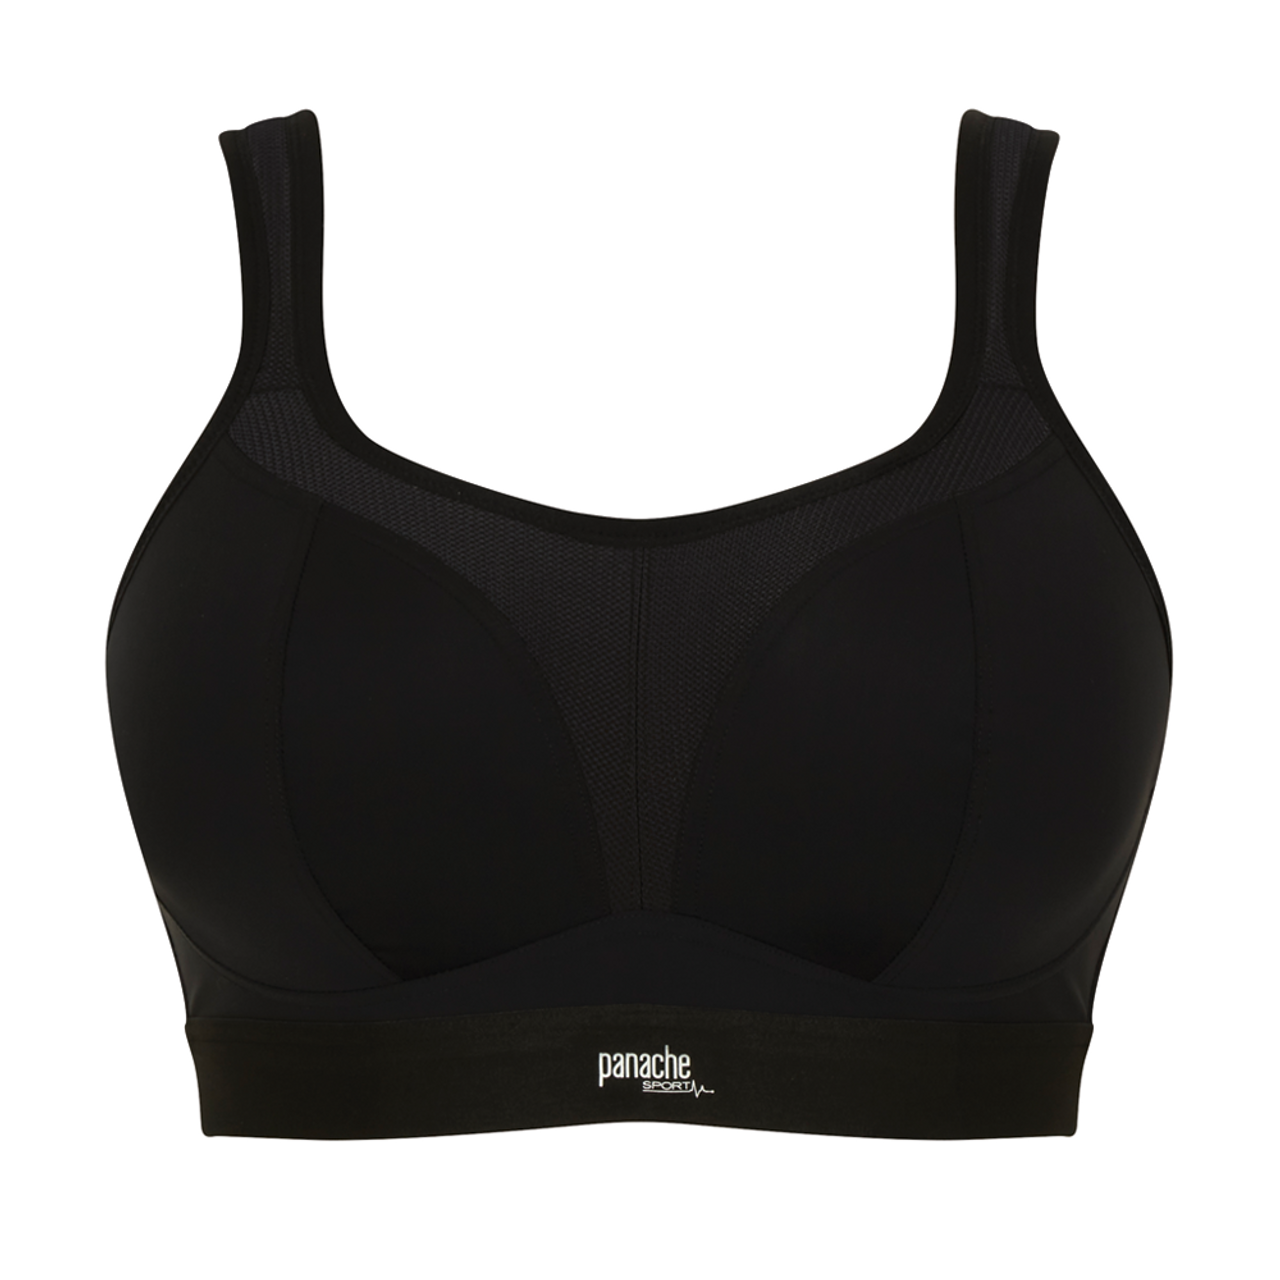 Best sports bra for large breasts UK - 13 products